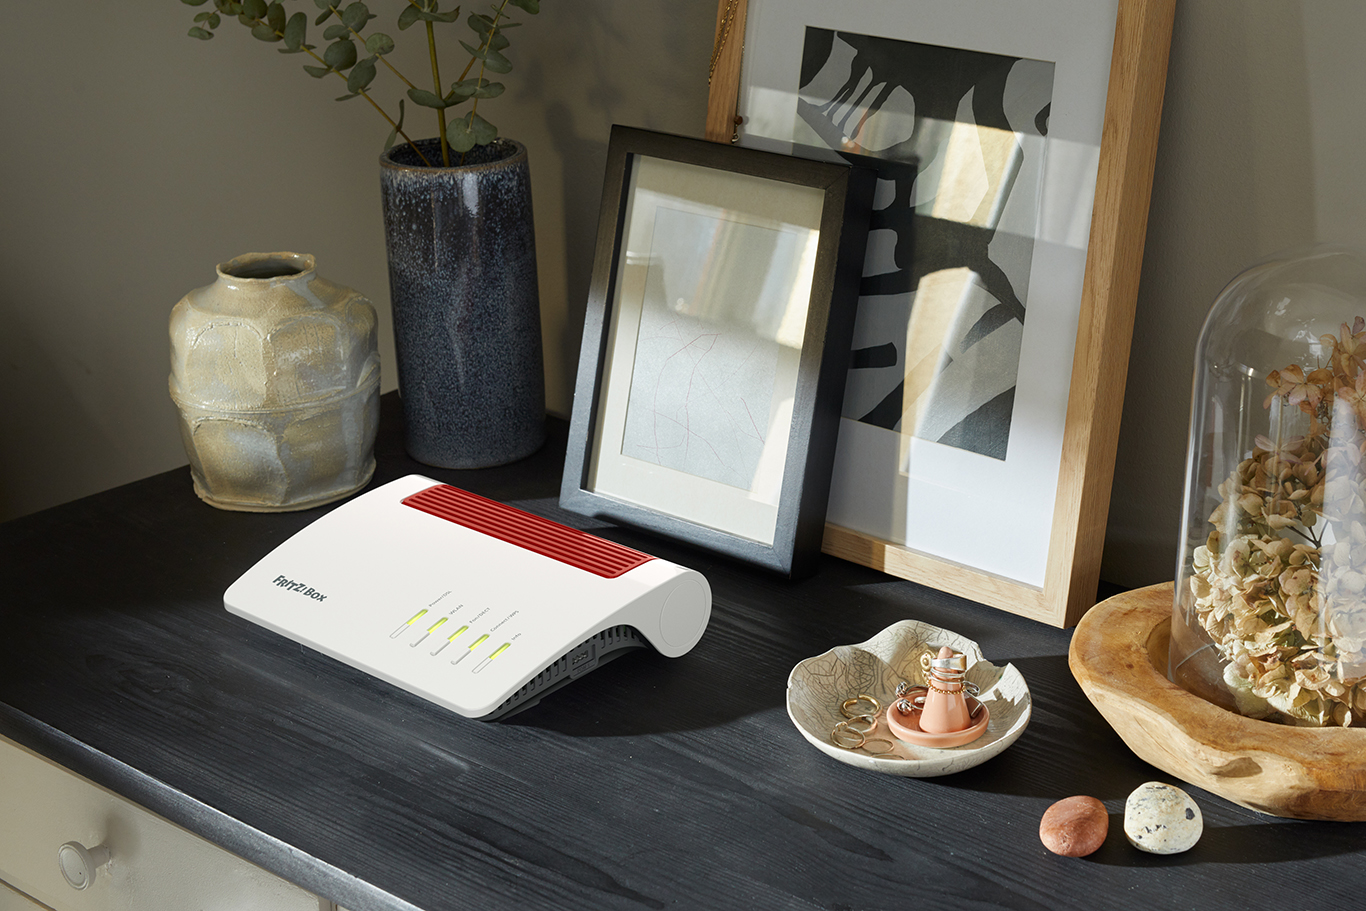 Transform your home into a world of smart technology with the FRITZ!Box, FRITZ!Fon, FRITZ!DECT, FRITZ!WLAN, FRITZ!Apps